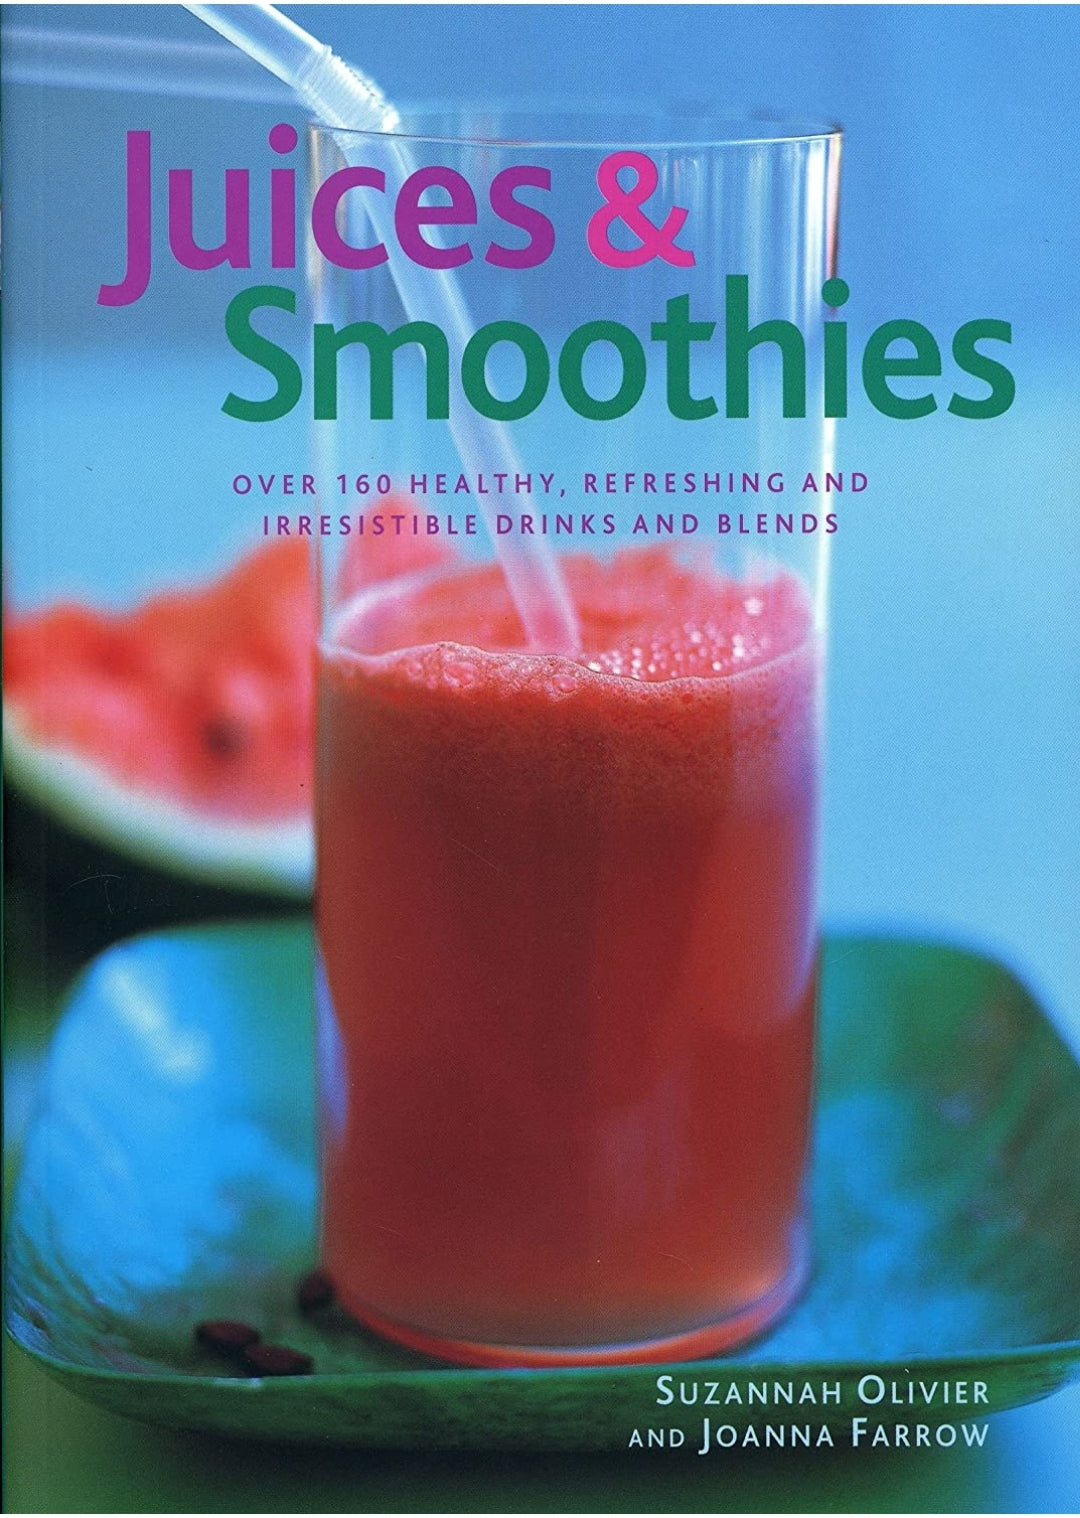 Juices & Smoothies: Over 160 Healthy, Refreshing and Irresistable Drinks and Blends *Like New